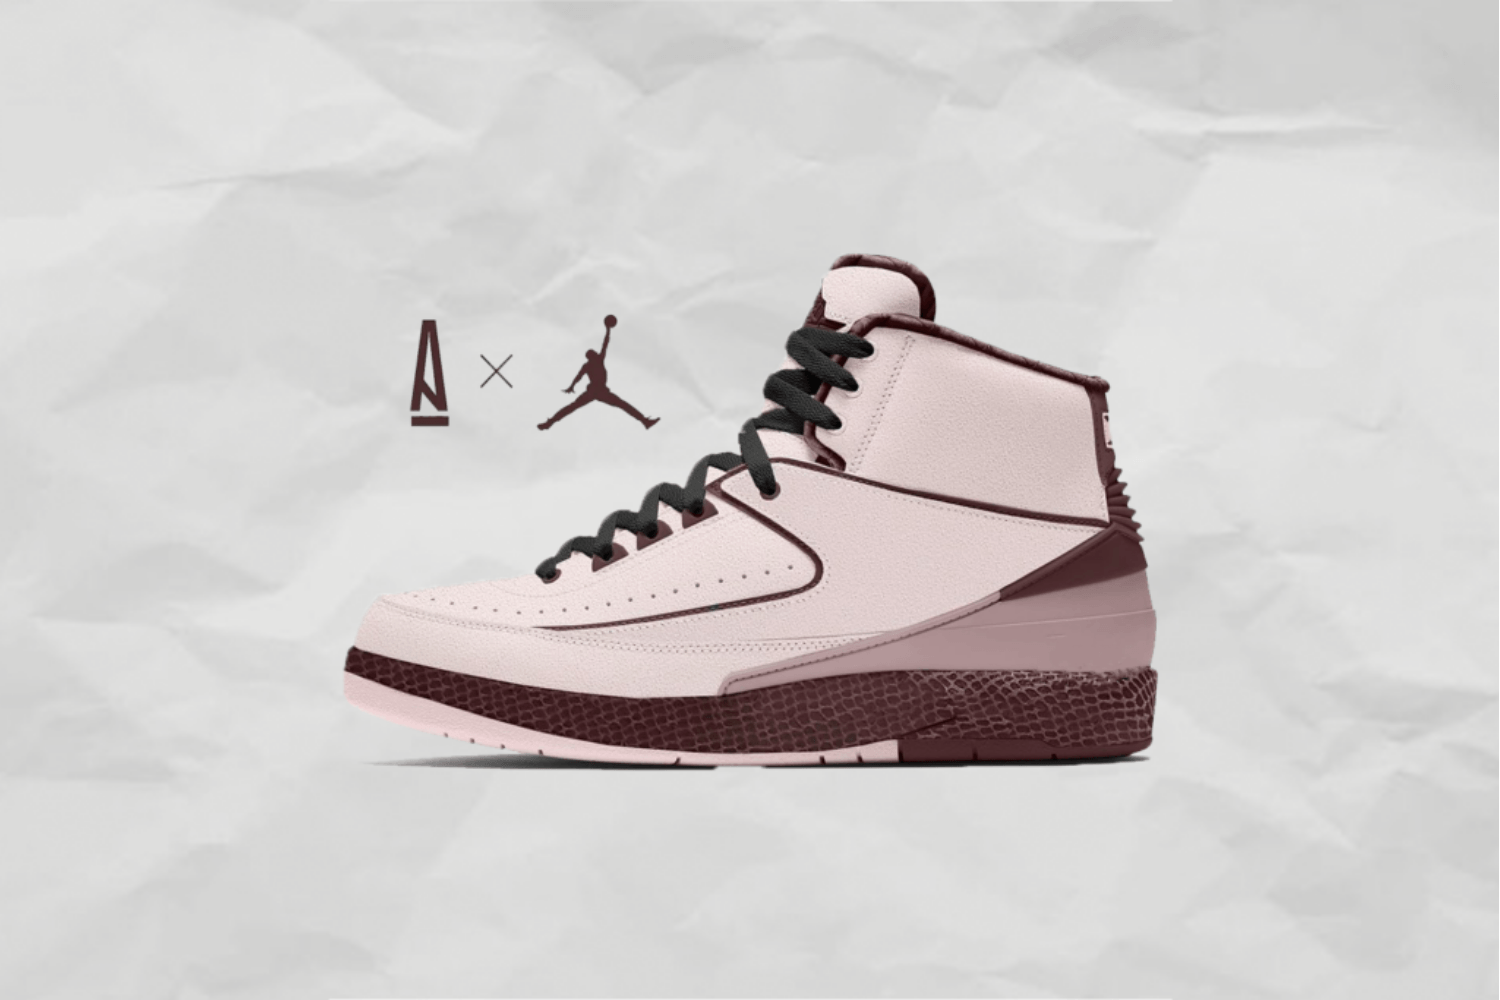 Will there release an Air Jordan 2 x A Ma Maniére?